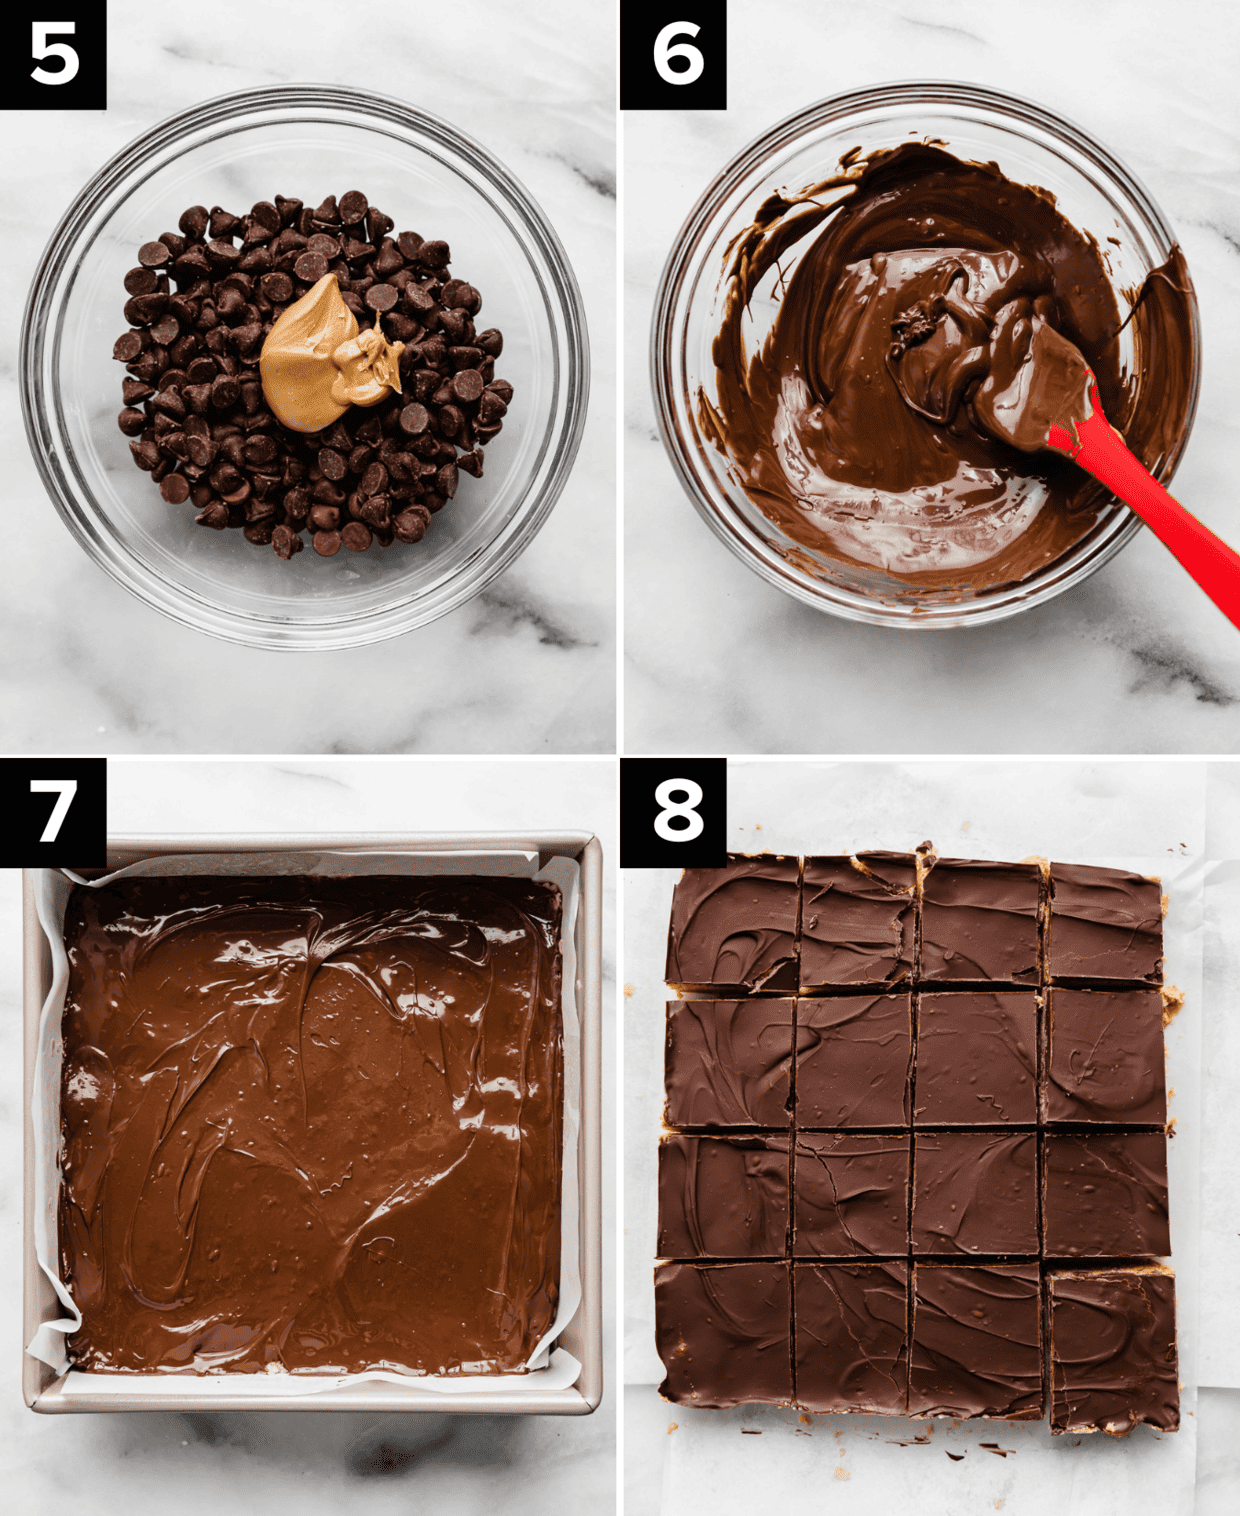 Four images showing the making of the chocolate layer for the top of Chocolate Peanut Butter Bars.